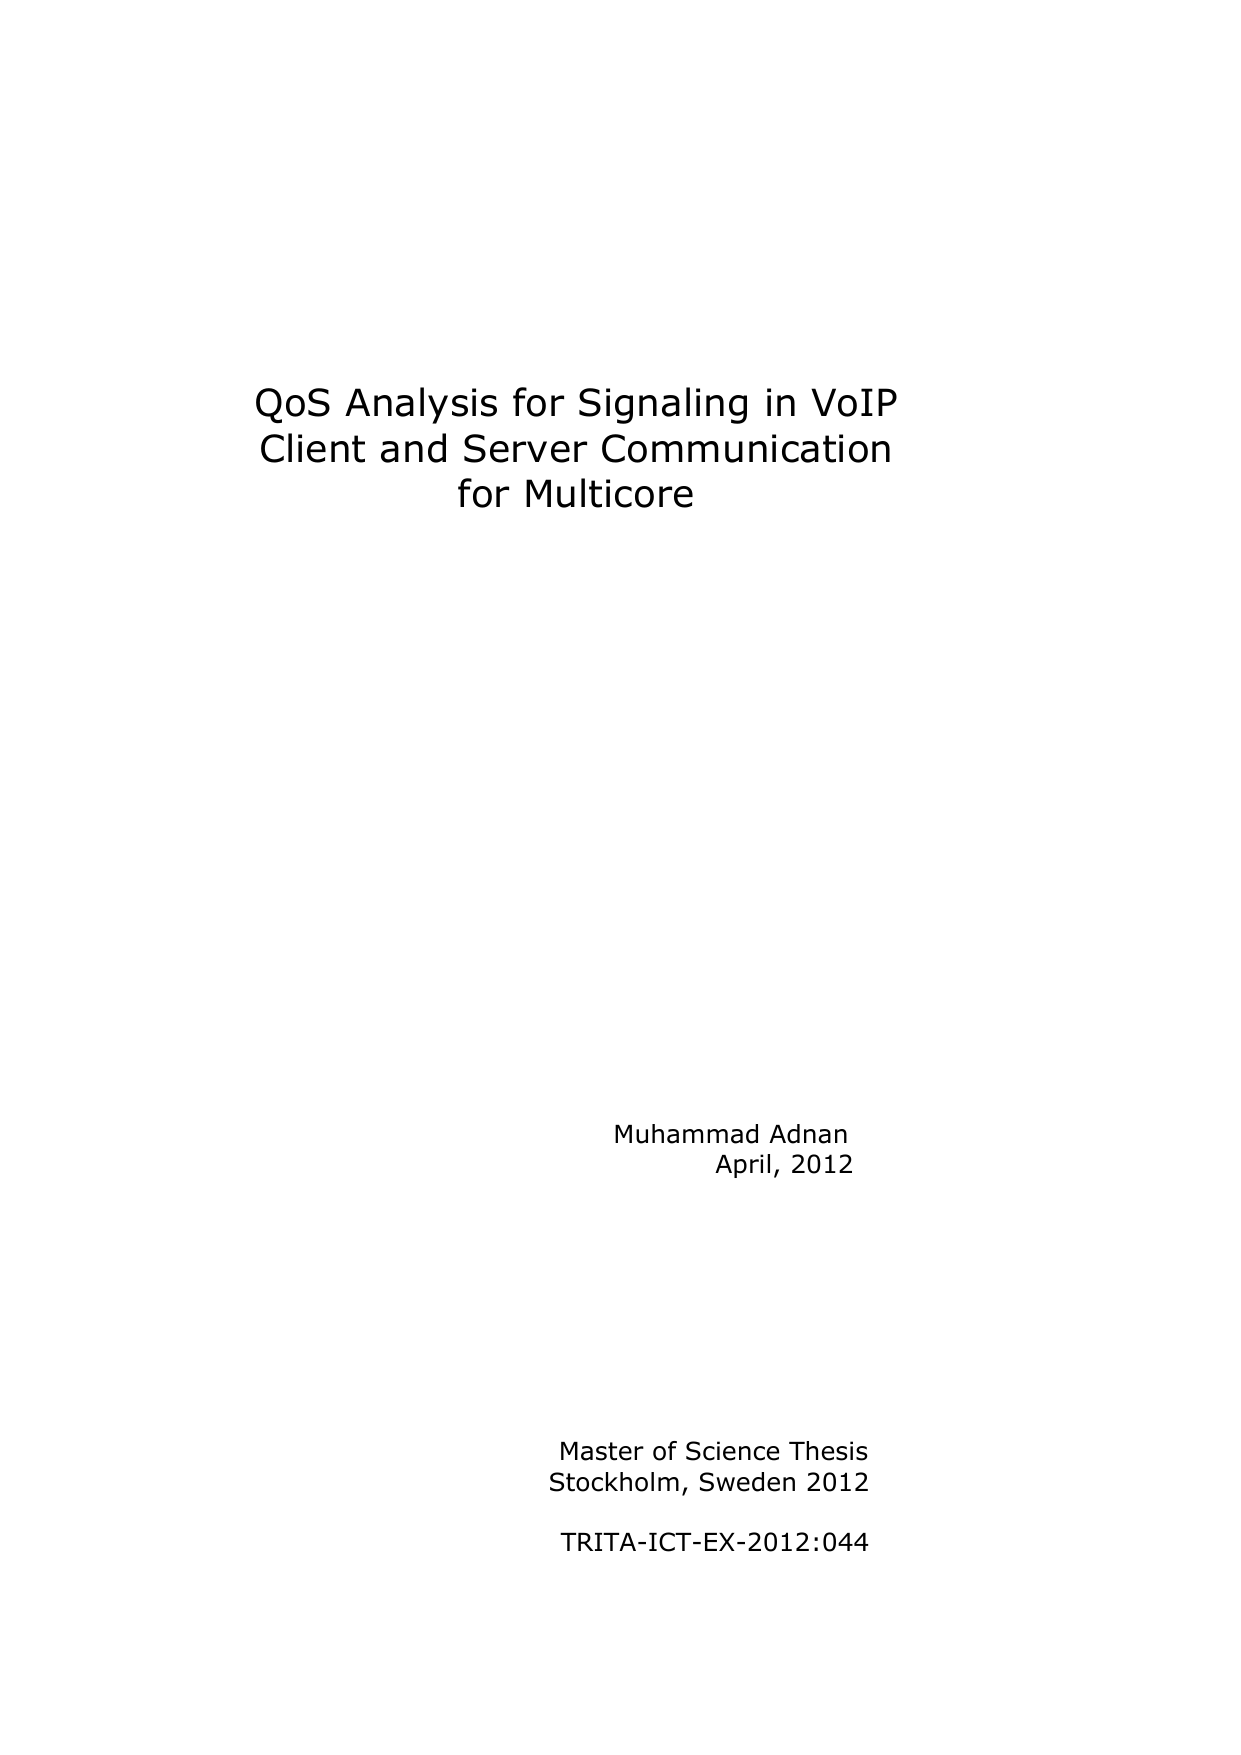 QoS Analysis for Signaling in VoIP Client and Server ... - 